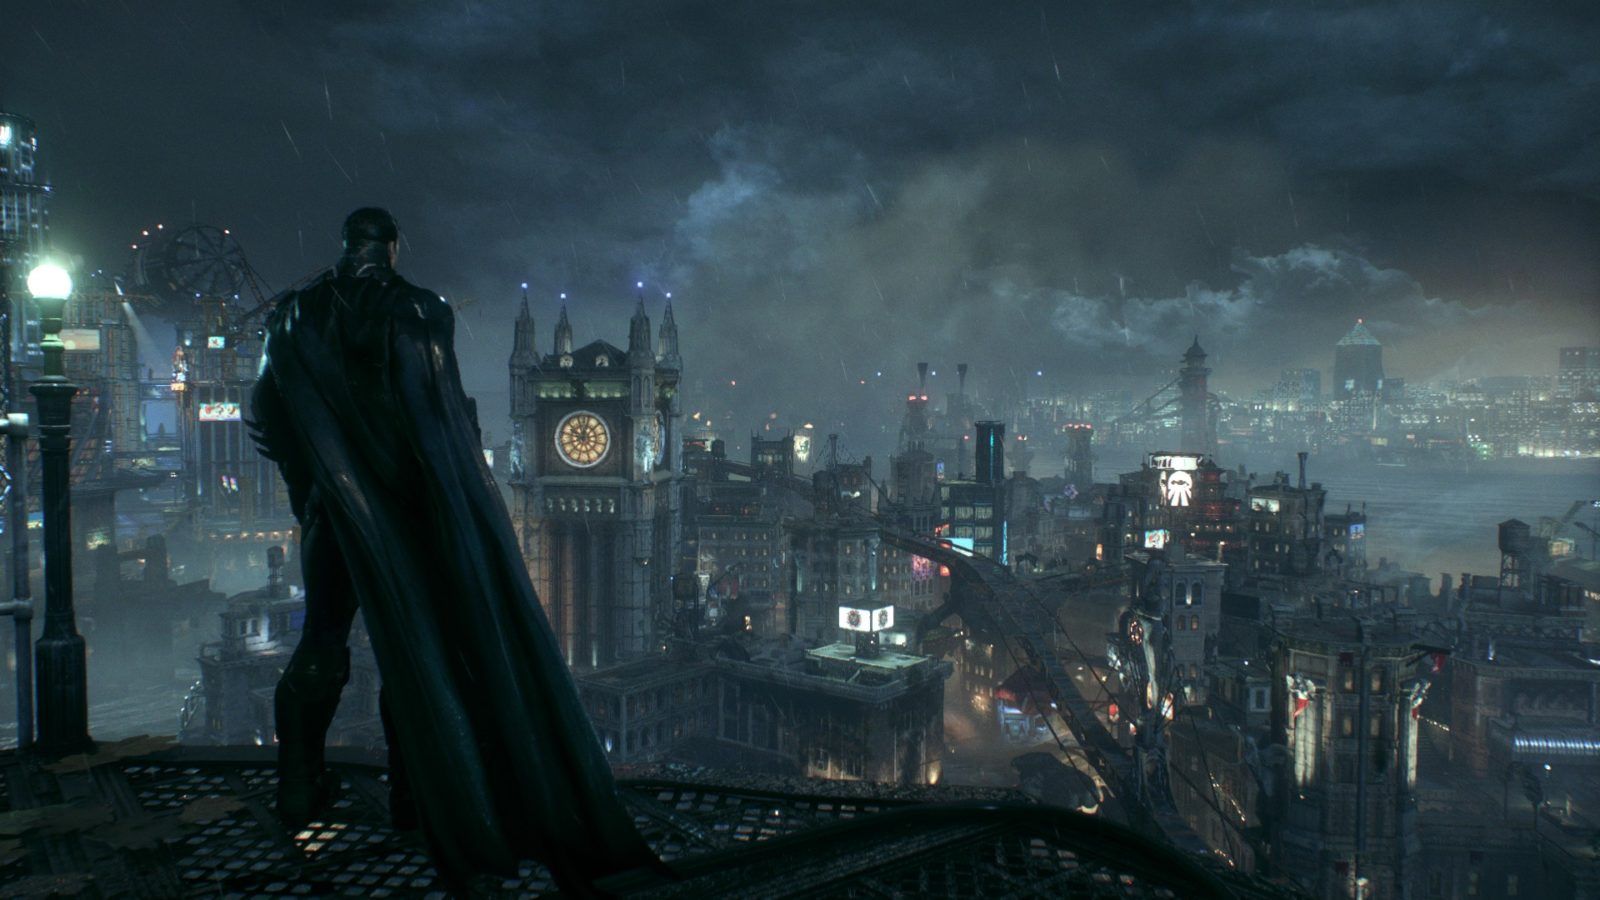 The ultimate guide to Gotham City for the die-hard fans of Batman